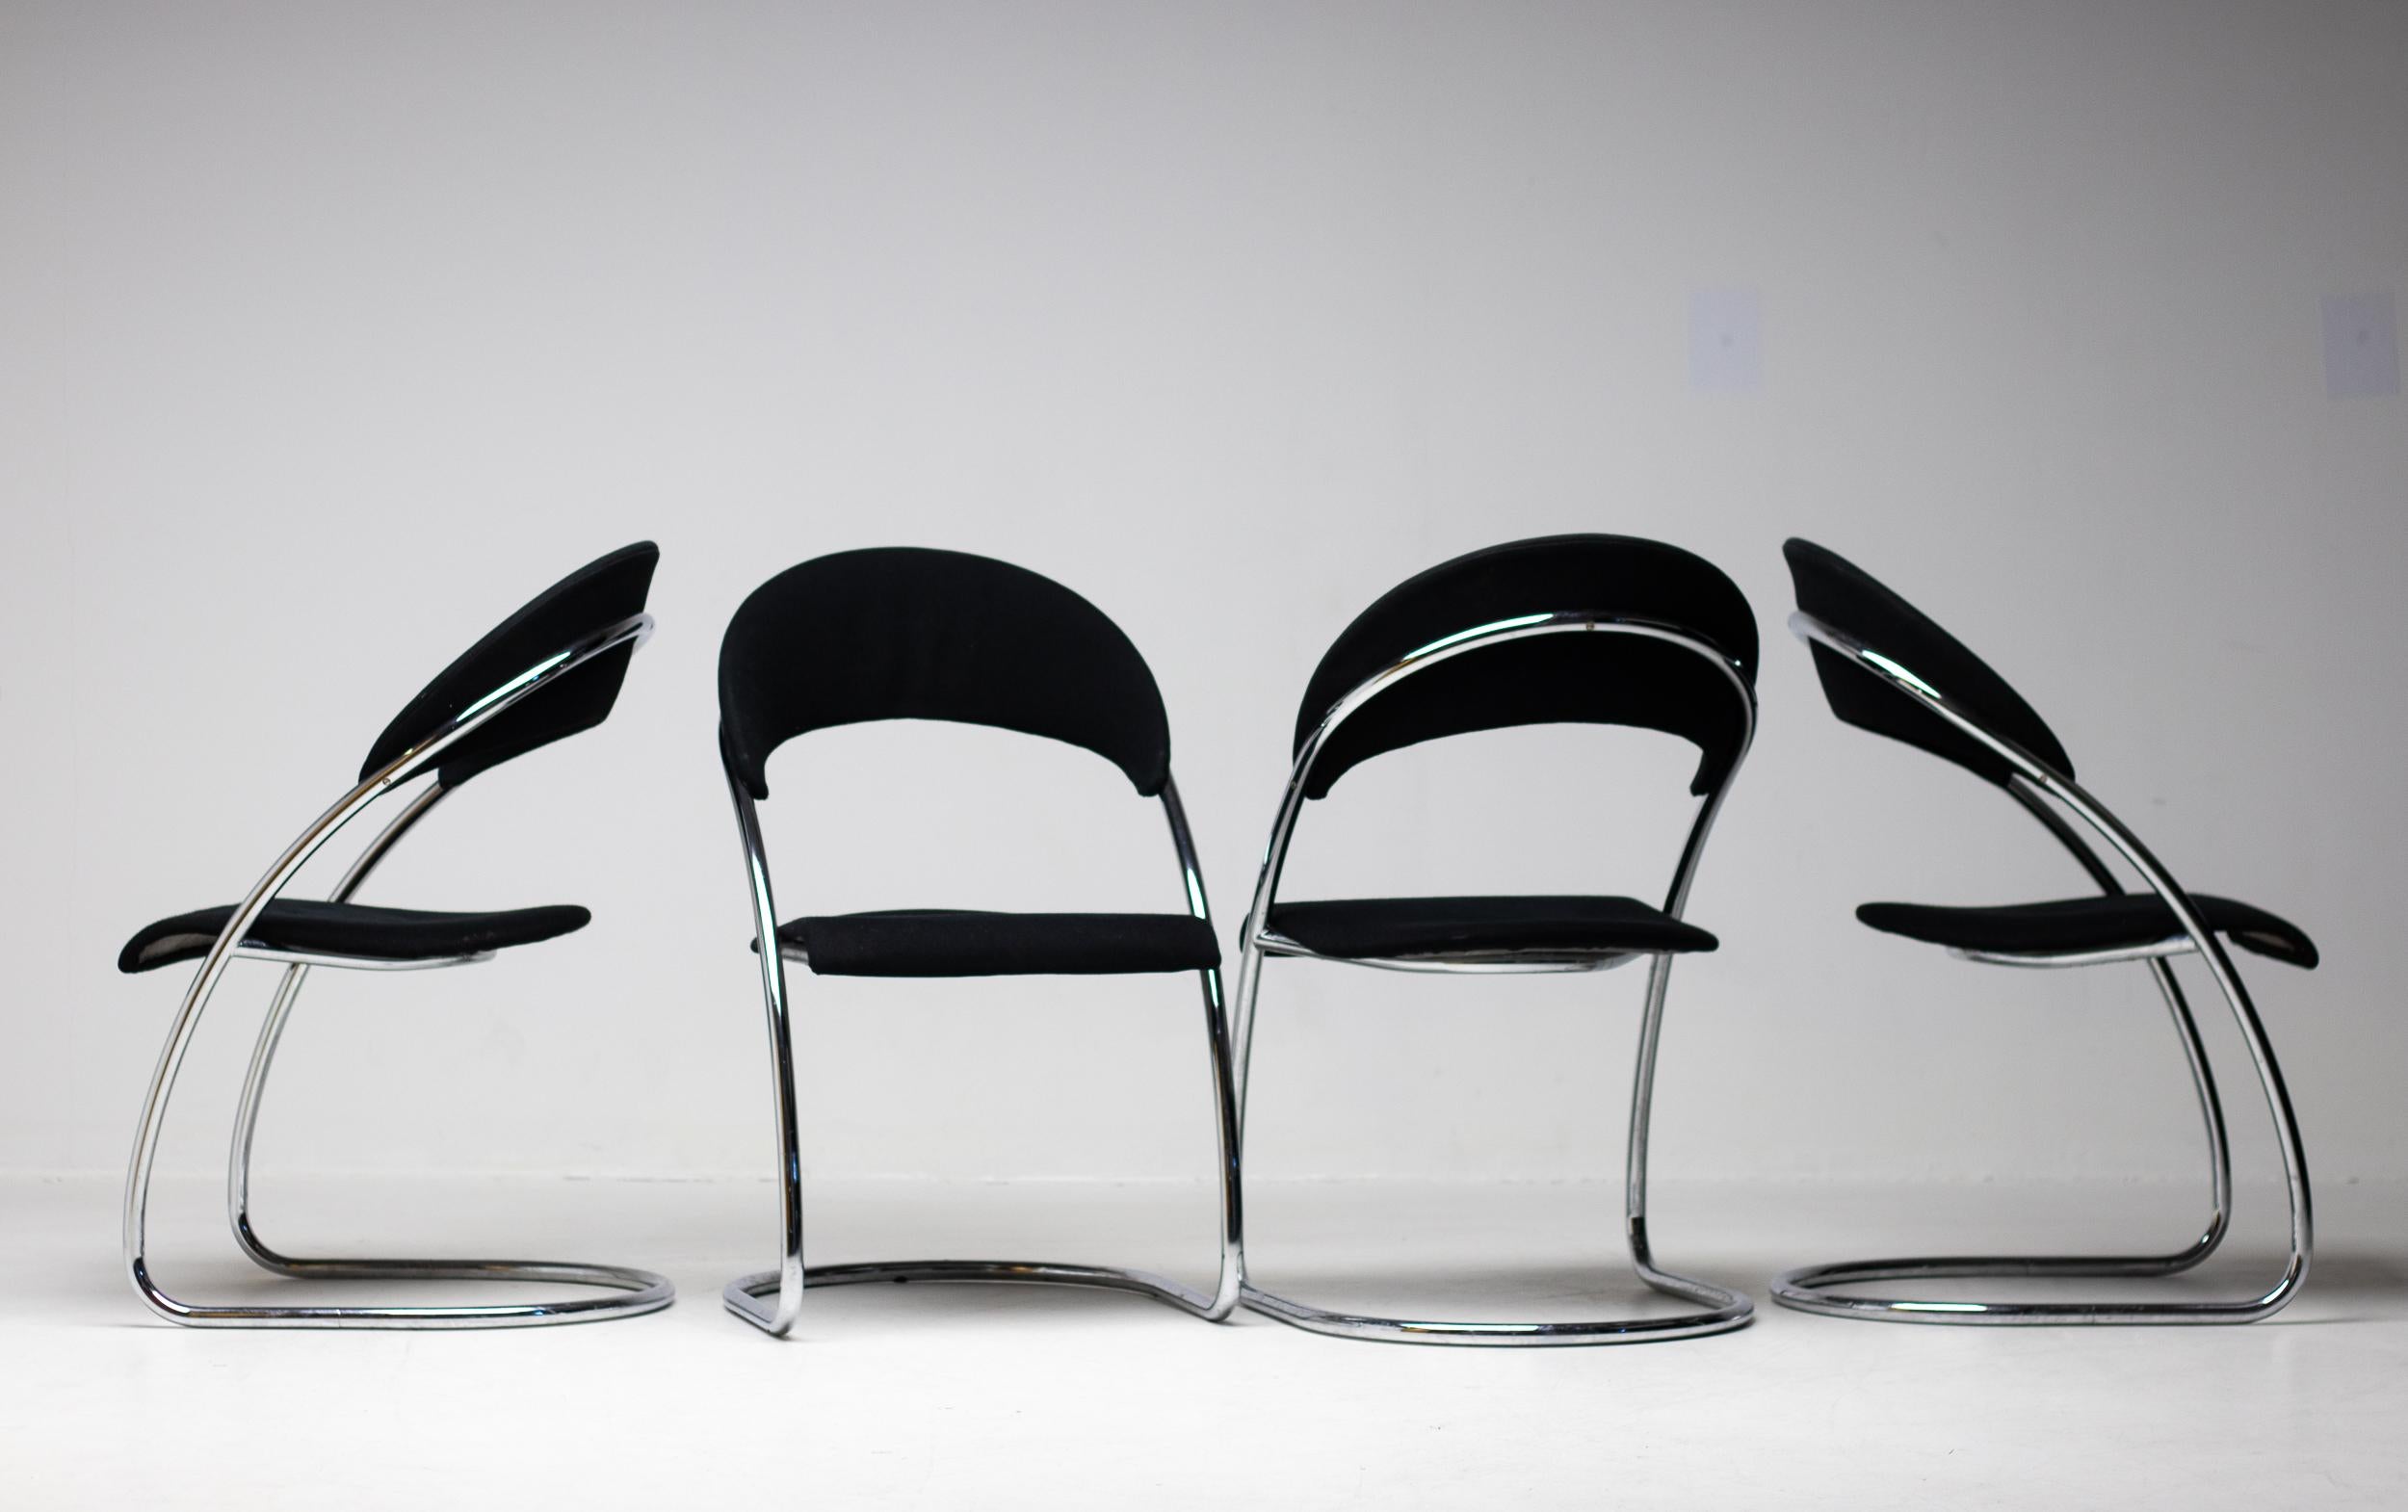 This hard to find set of 4 Thonet chairs, model ST 14, represents the modernist idea of the Bauhaus in an elegant way. Designed in 1931 for DESTA Berlin, later Thonet, Hans Luckhardt designed this very elegant but not easy to manufacture tubular